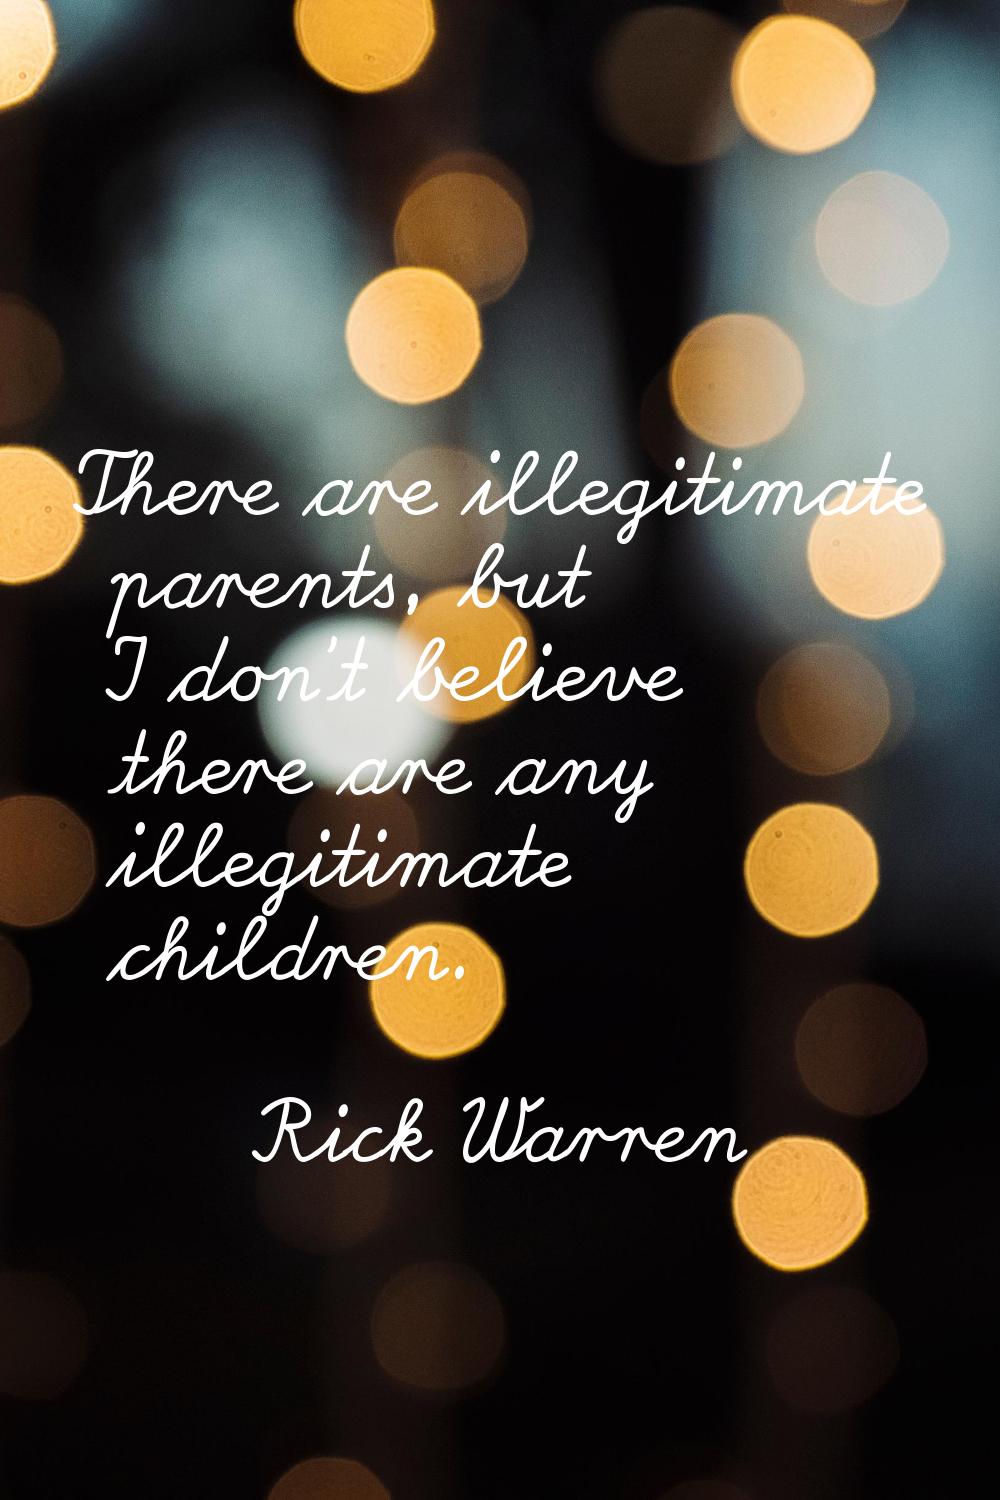 There are illegitimate parents, but I don't believe there are any illegitimate children.